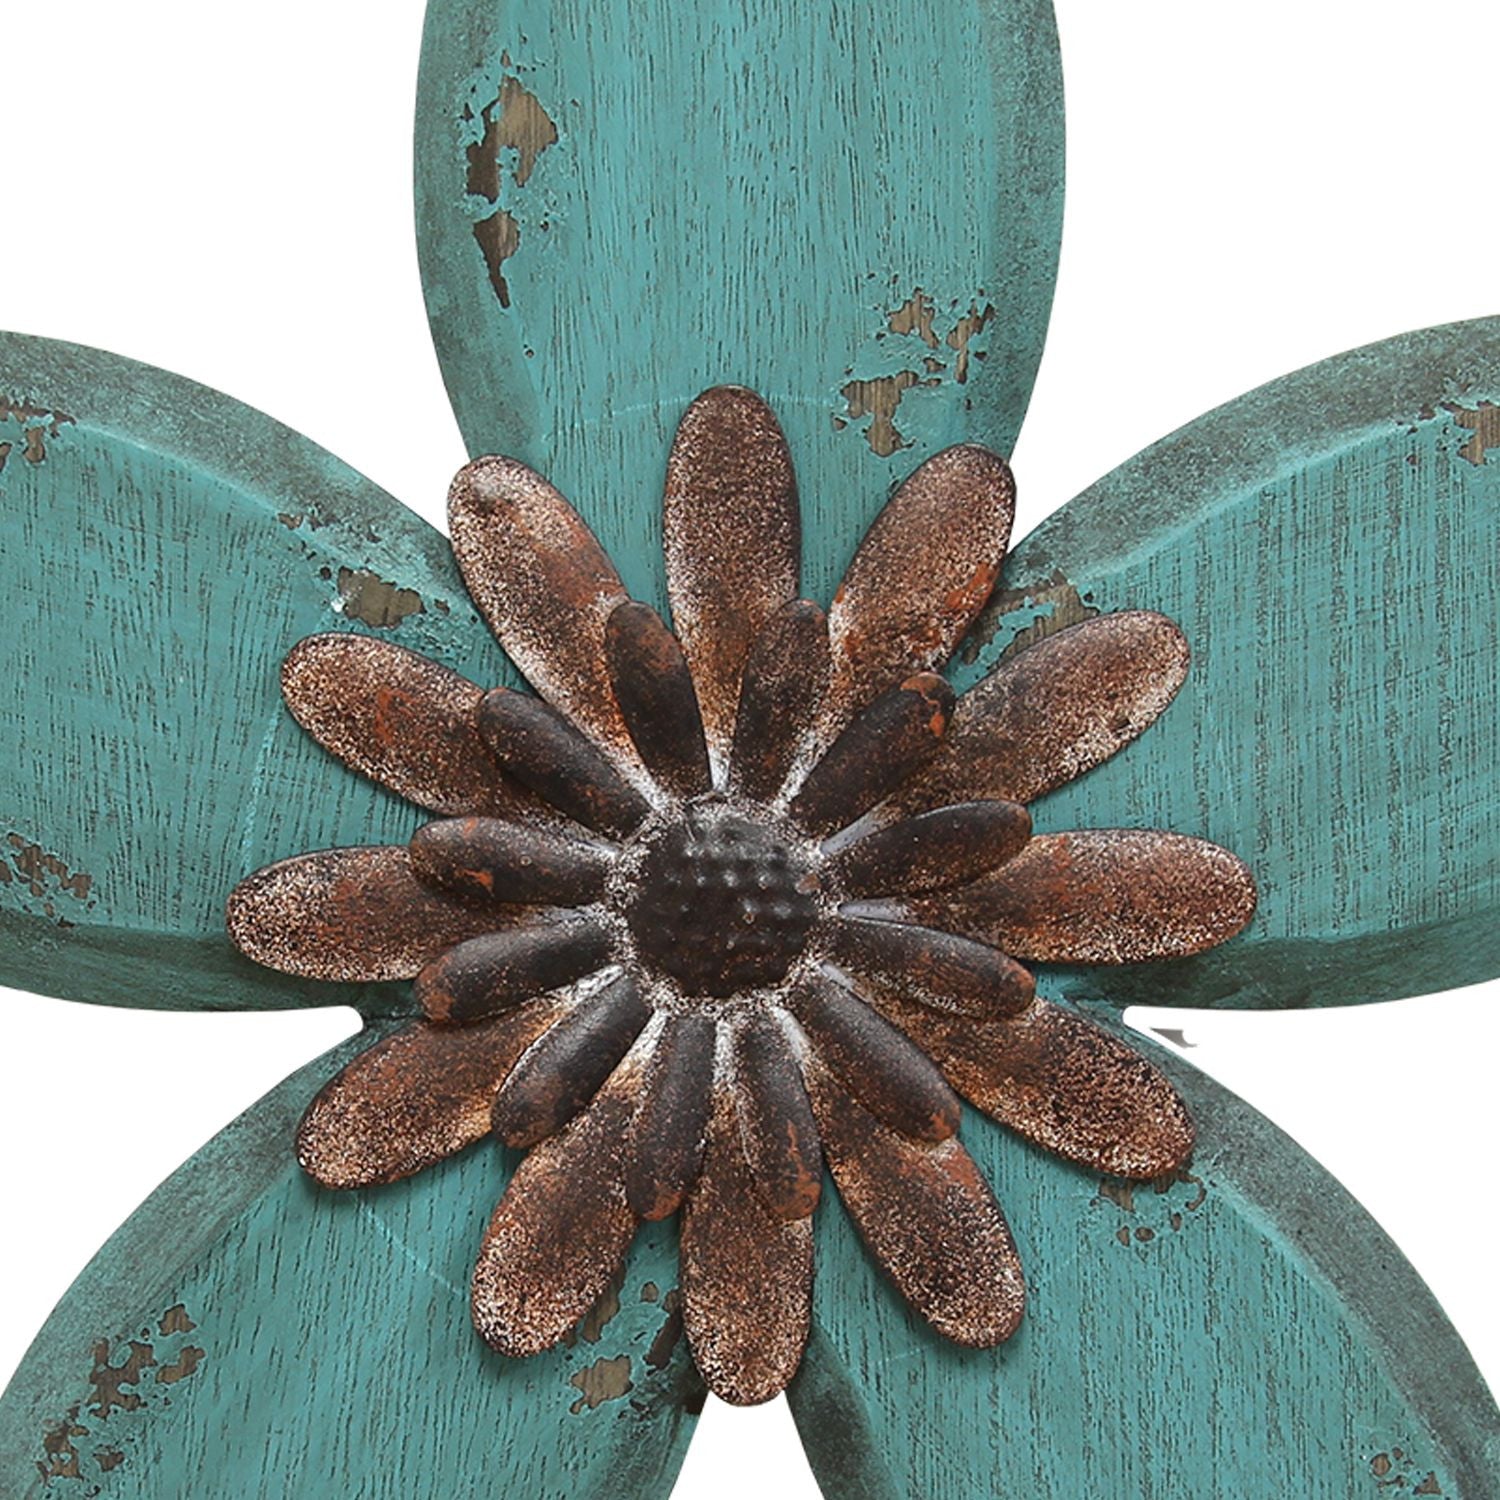 Distressed Teal And Red Antique Flower Metal Wall Decor | 14.75